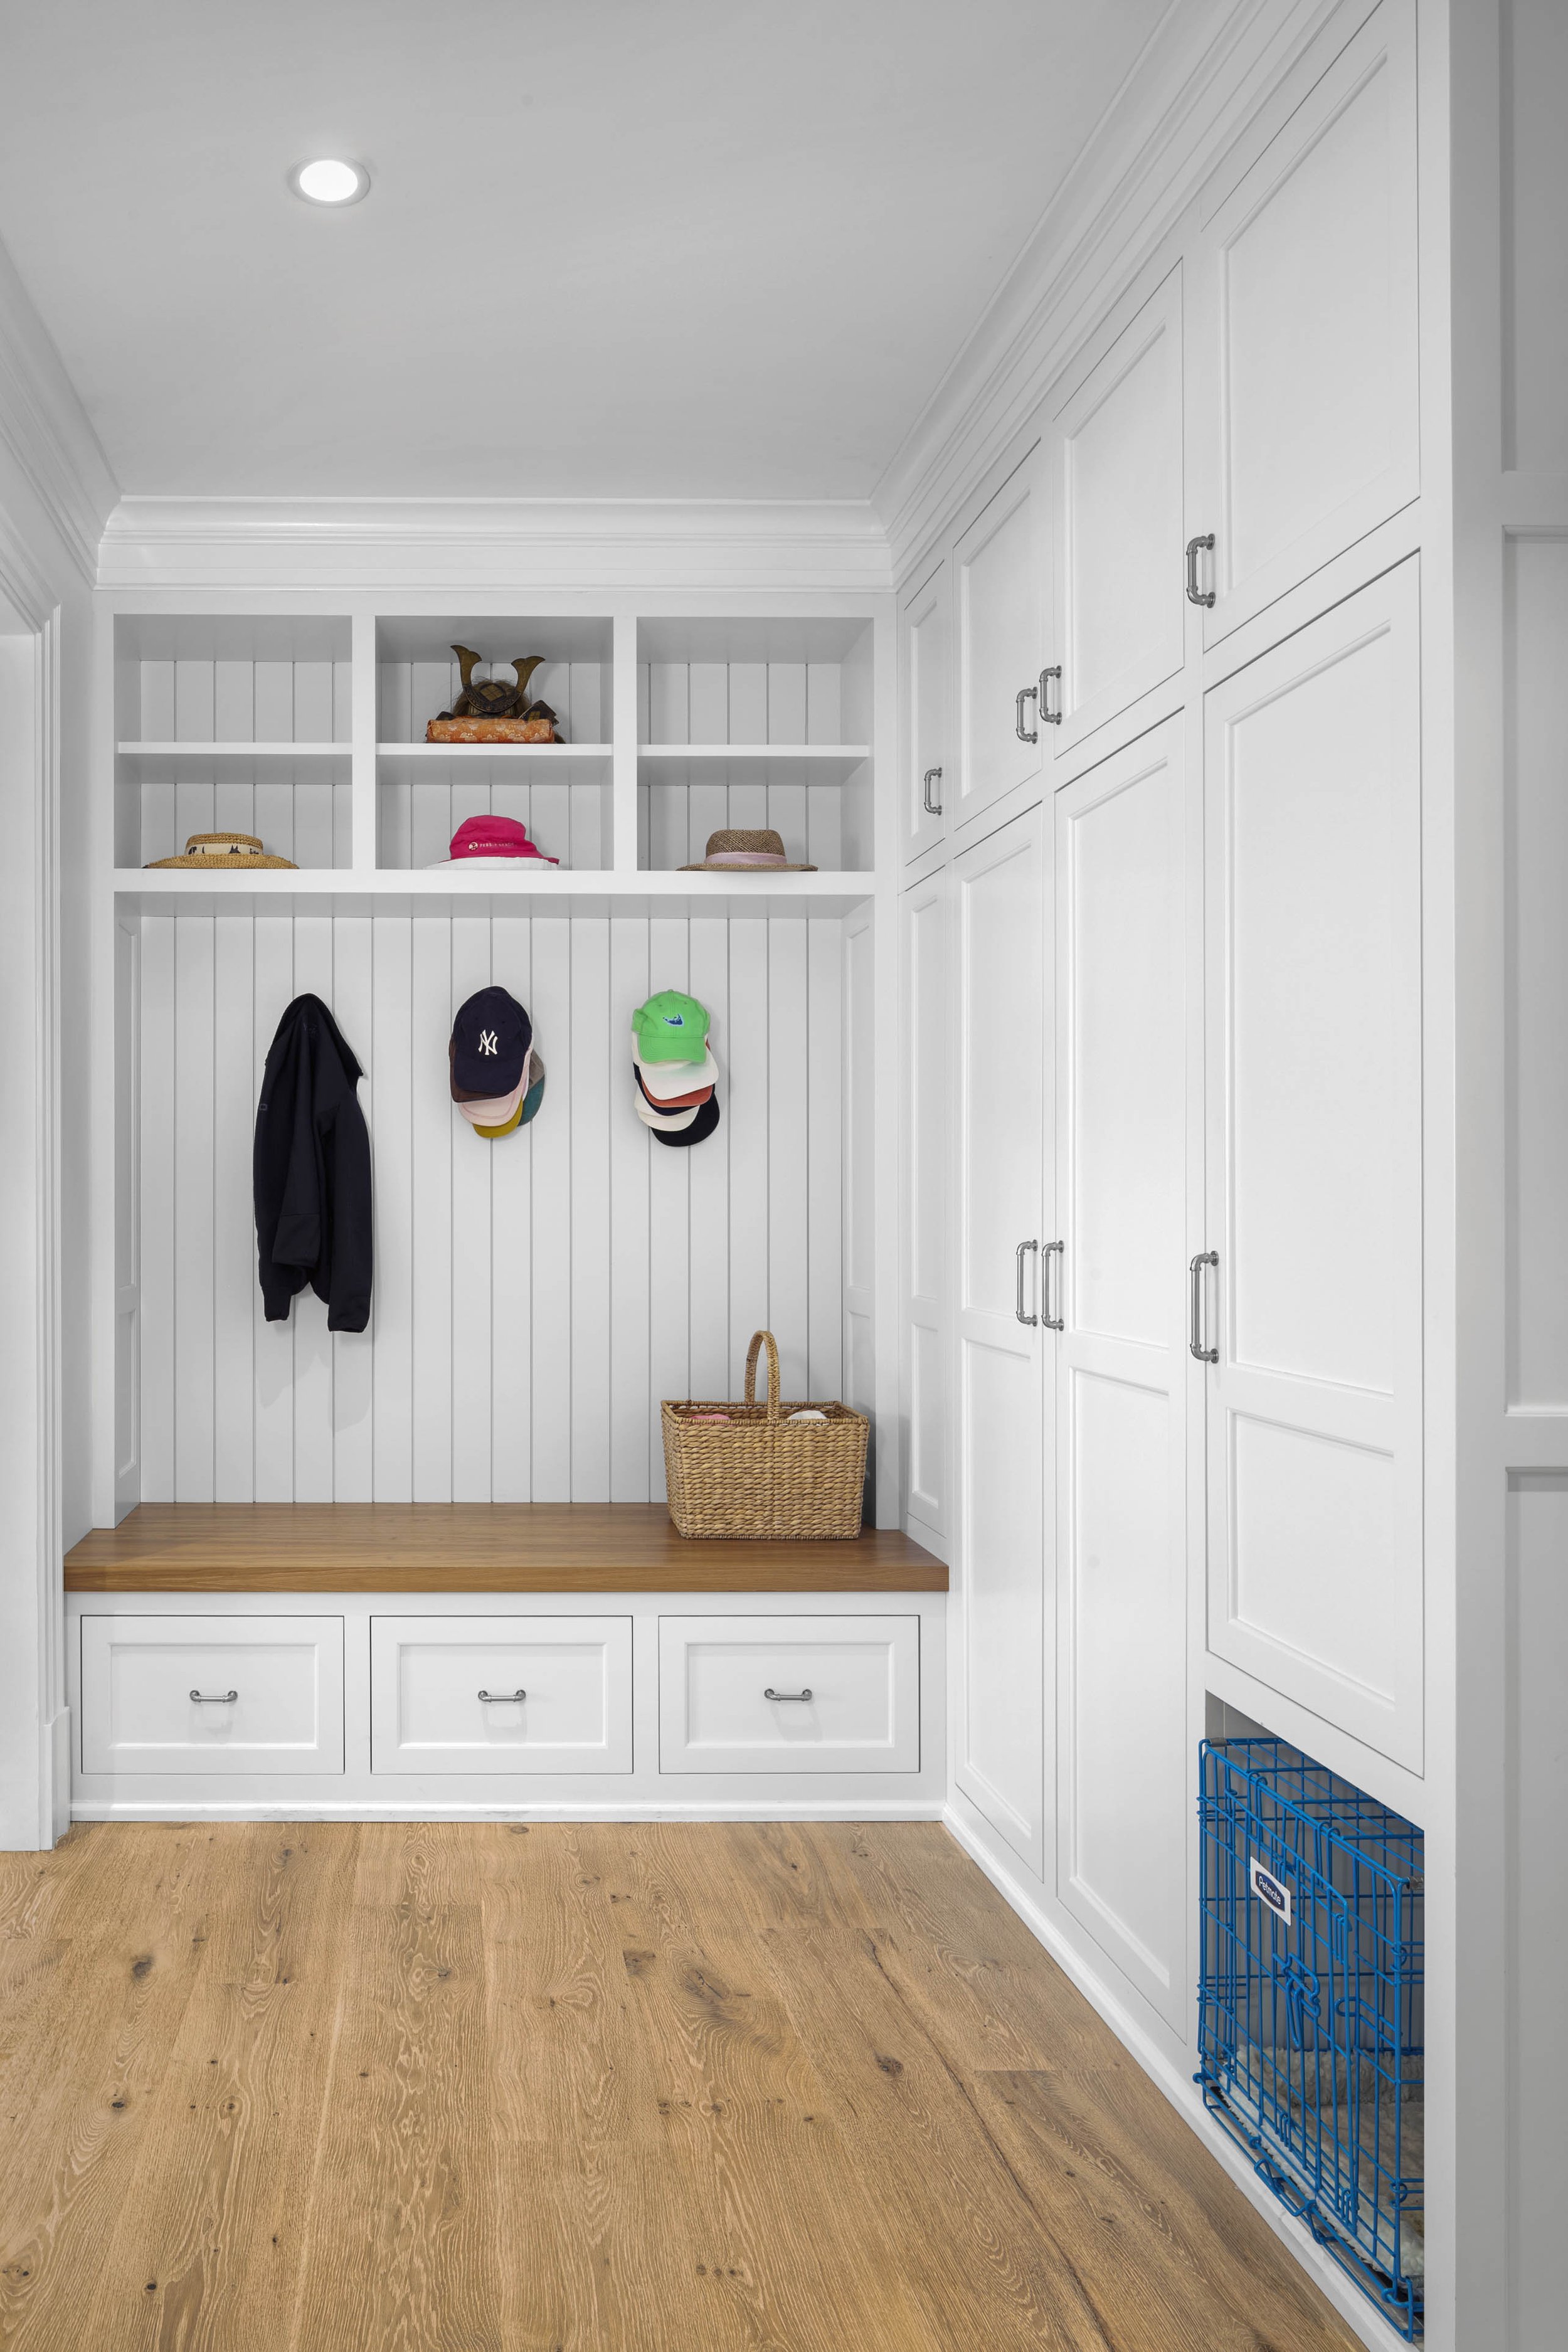 Mudroom and built in pet crate.